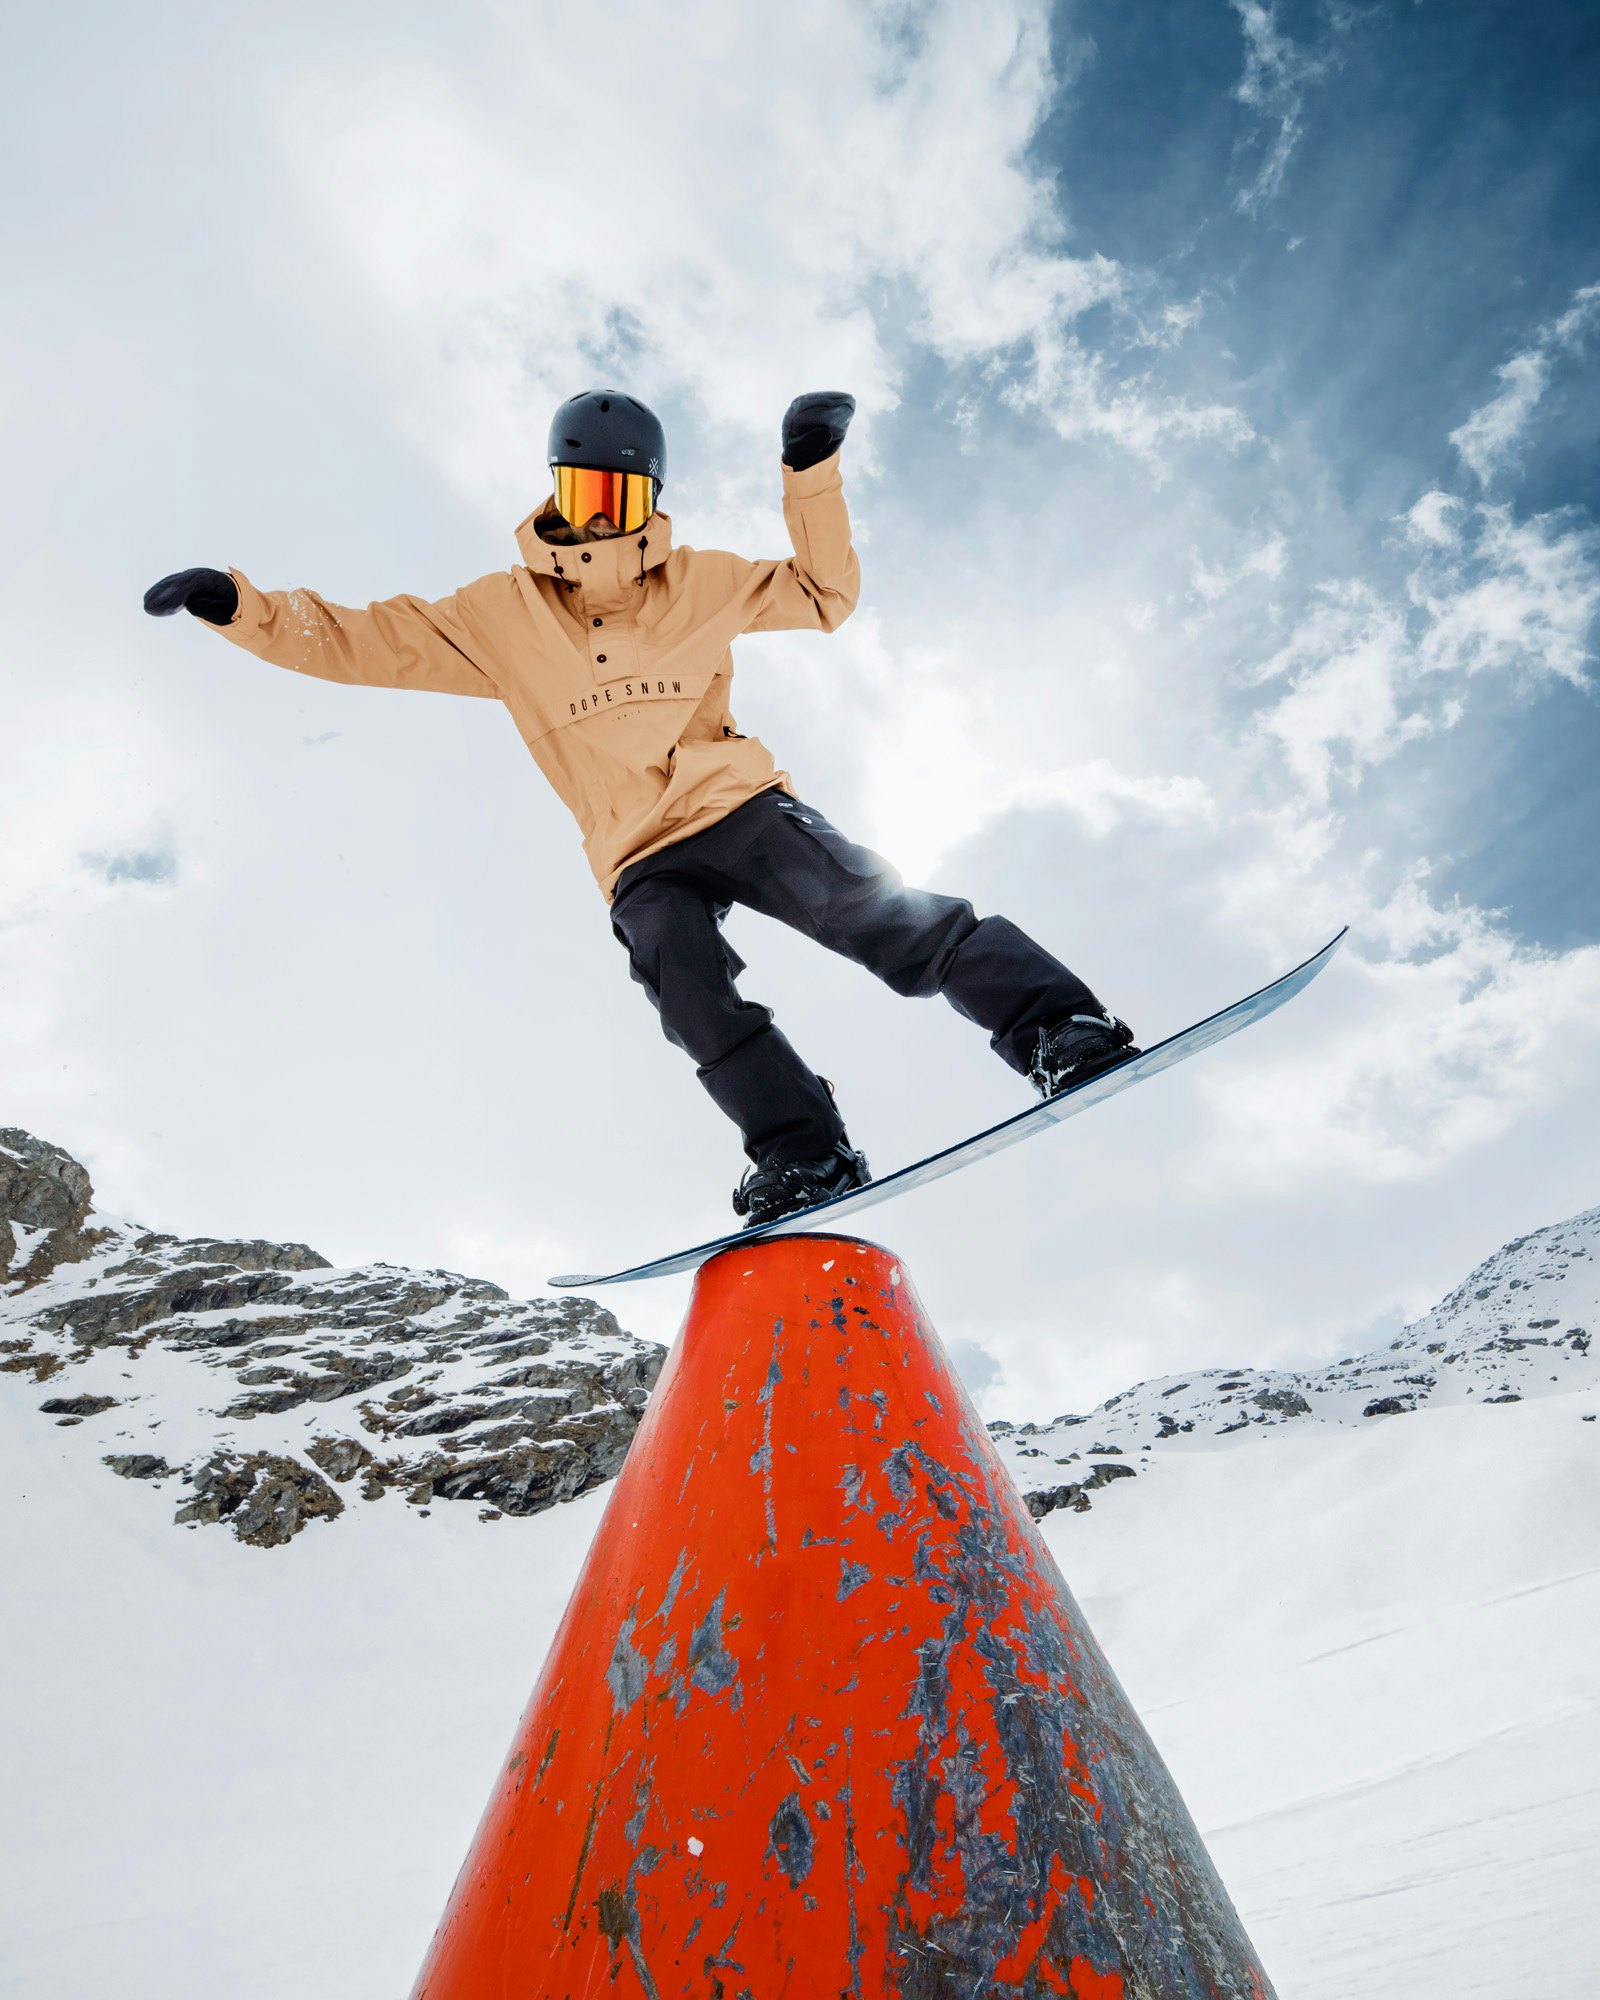 Park and freestyle snowboards